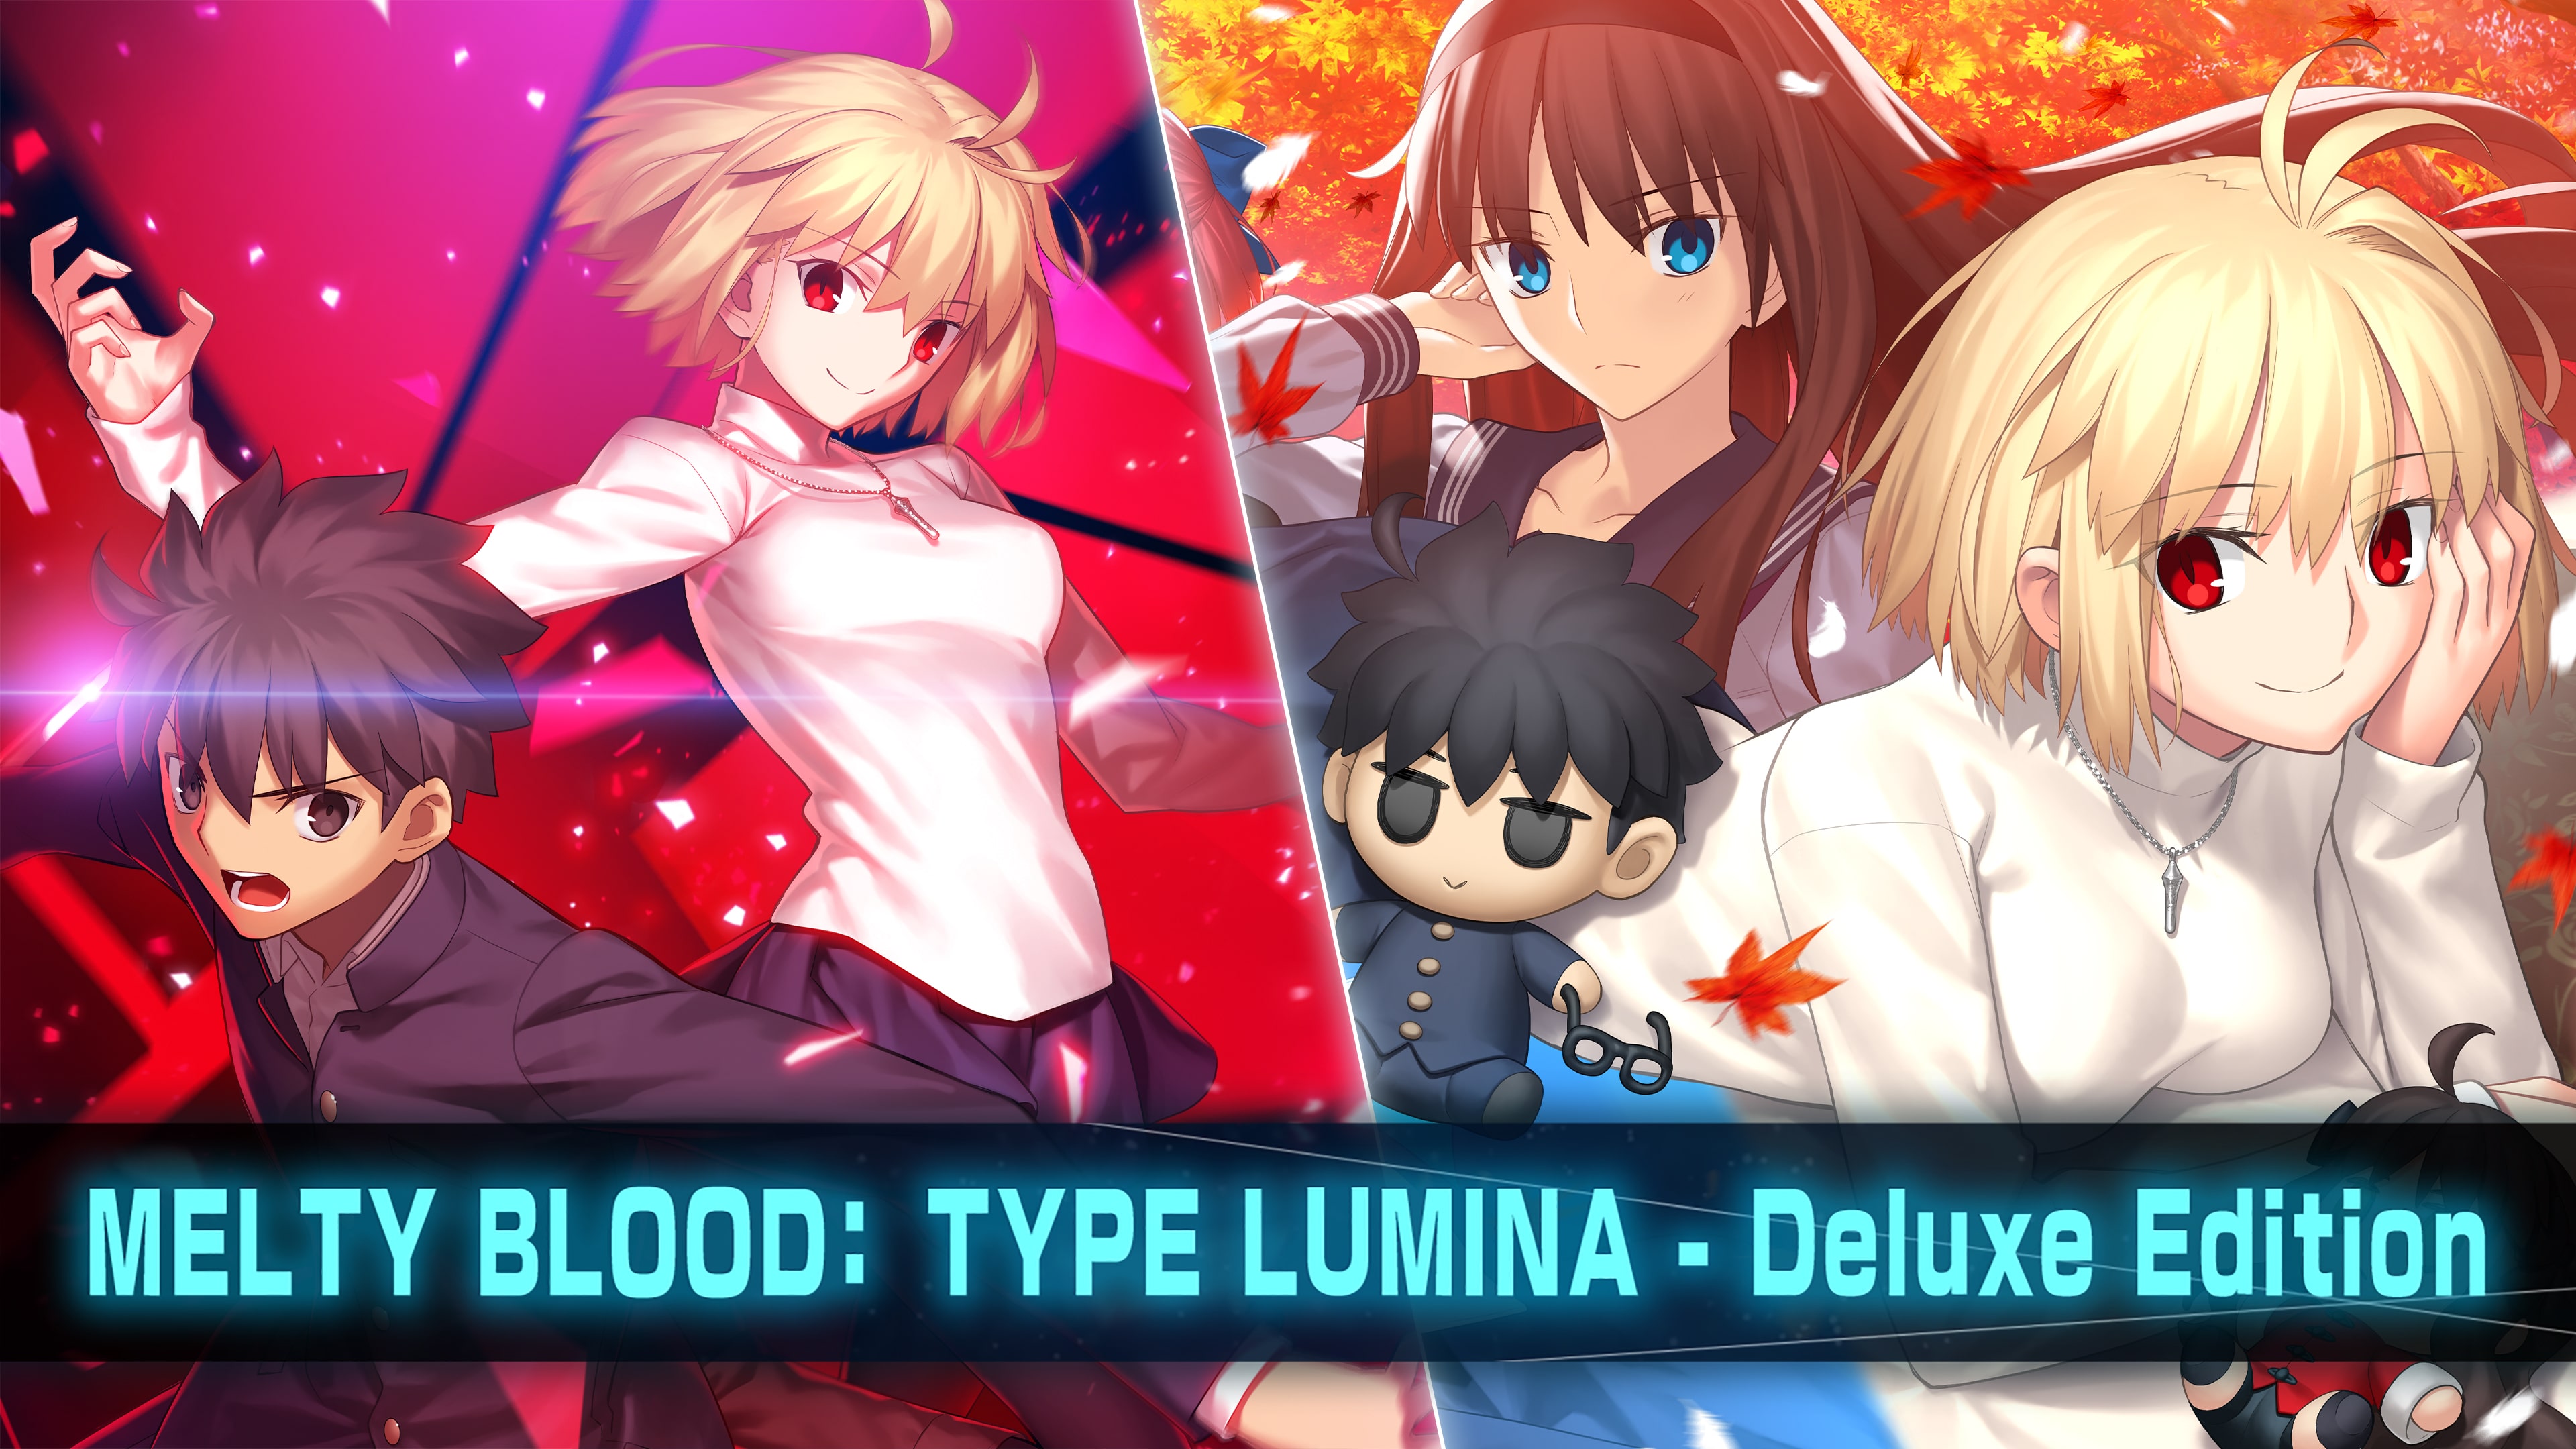 MELTY BLOOD: TYPE LUMINA - Deluxe Edition (Simplified Chinese, English, Korean, Japanese, Traditional Chinese)